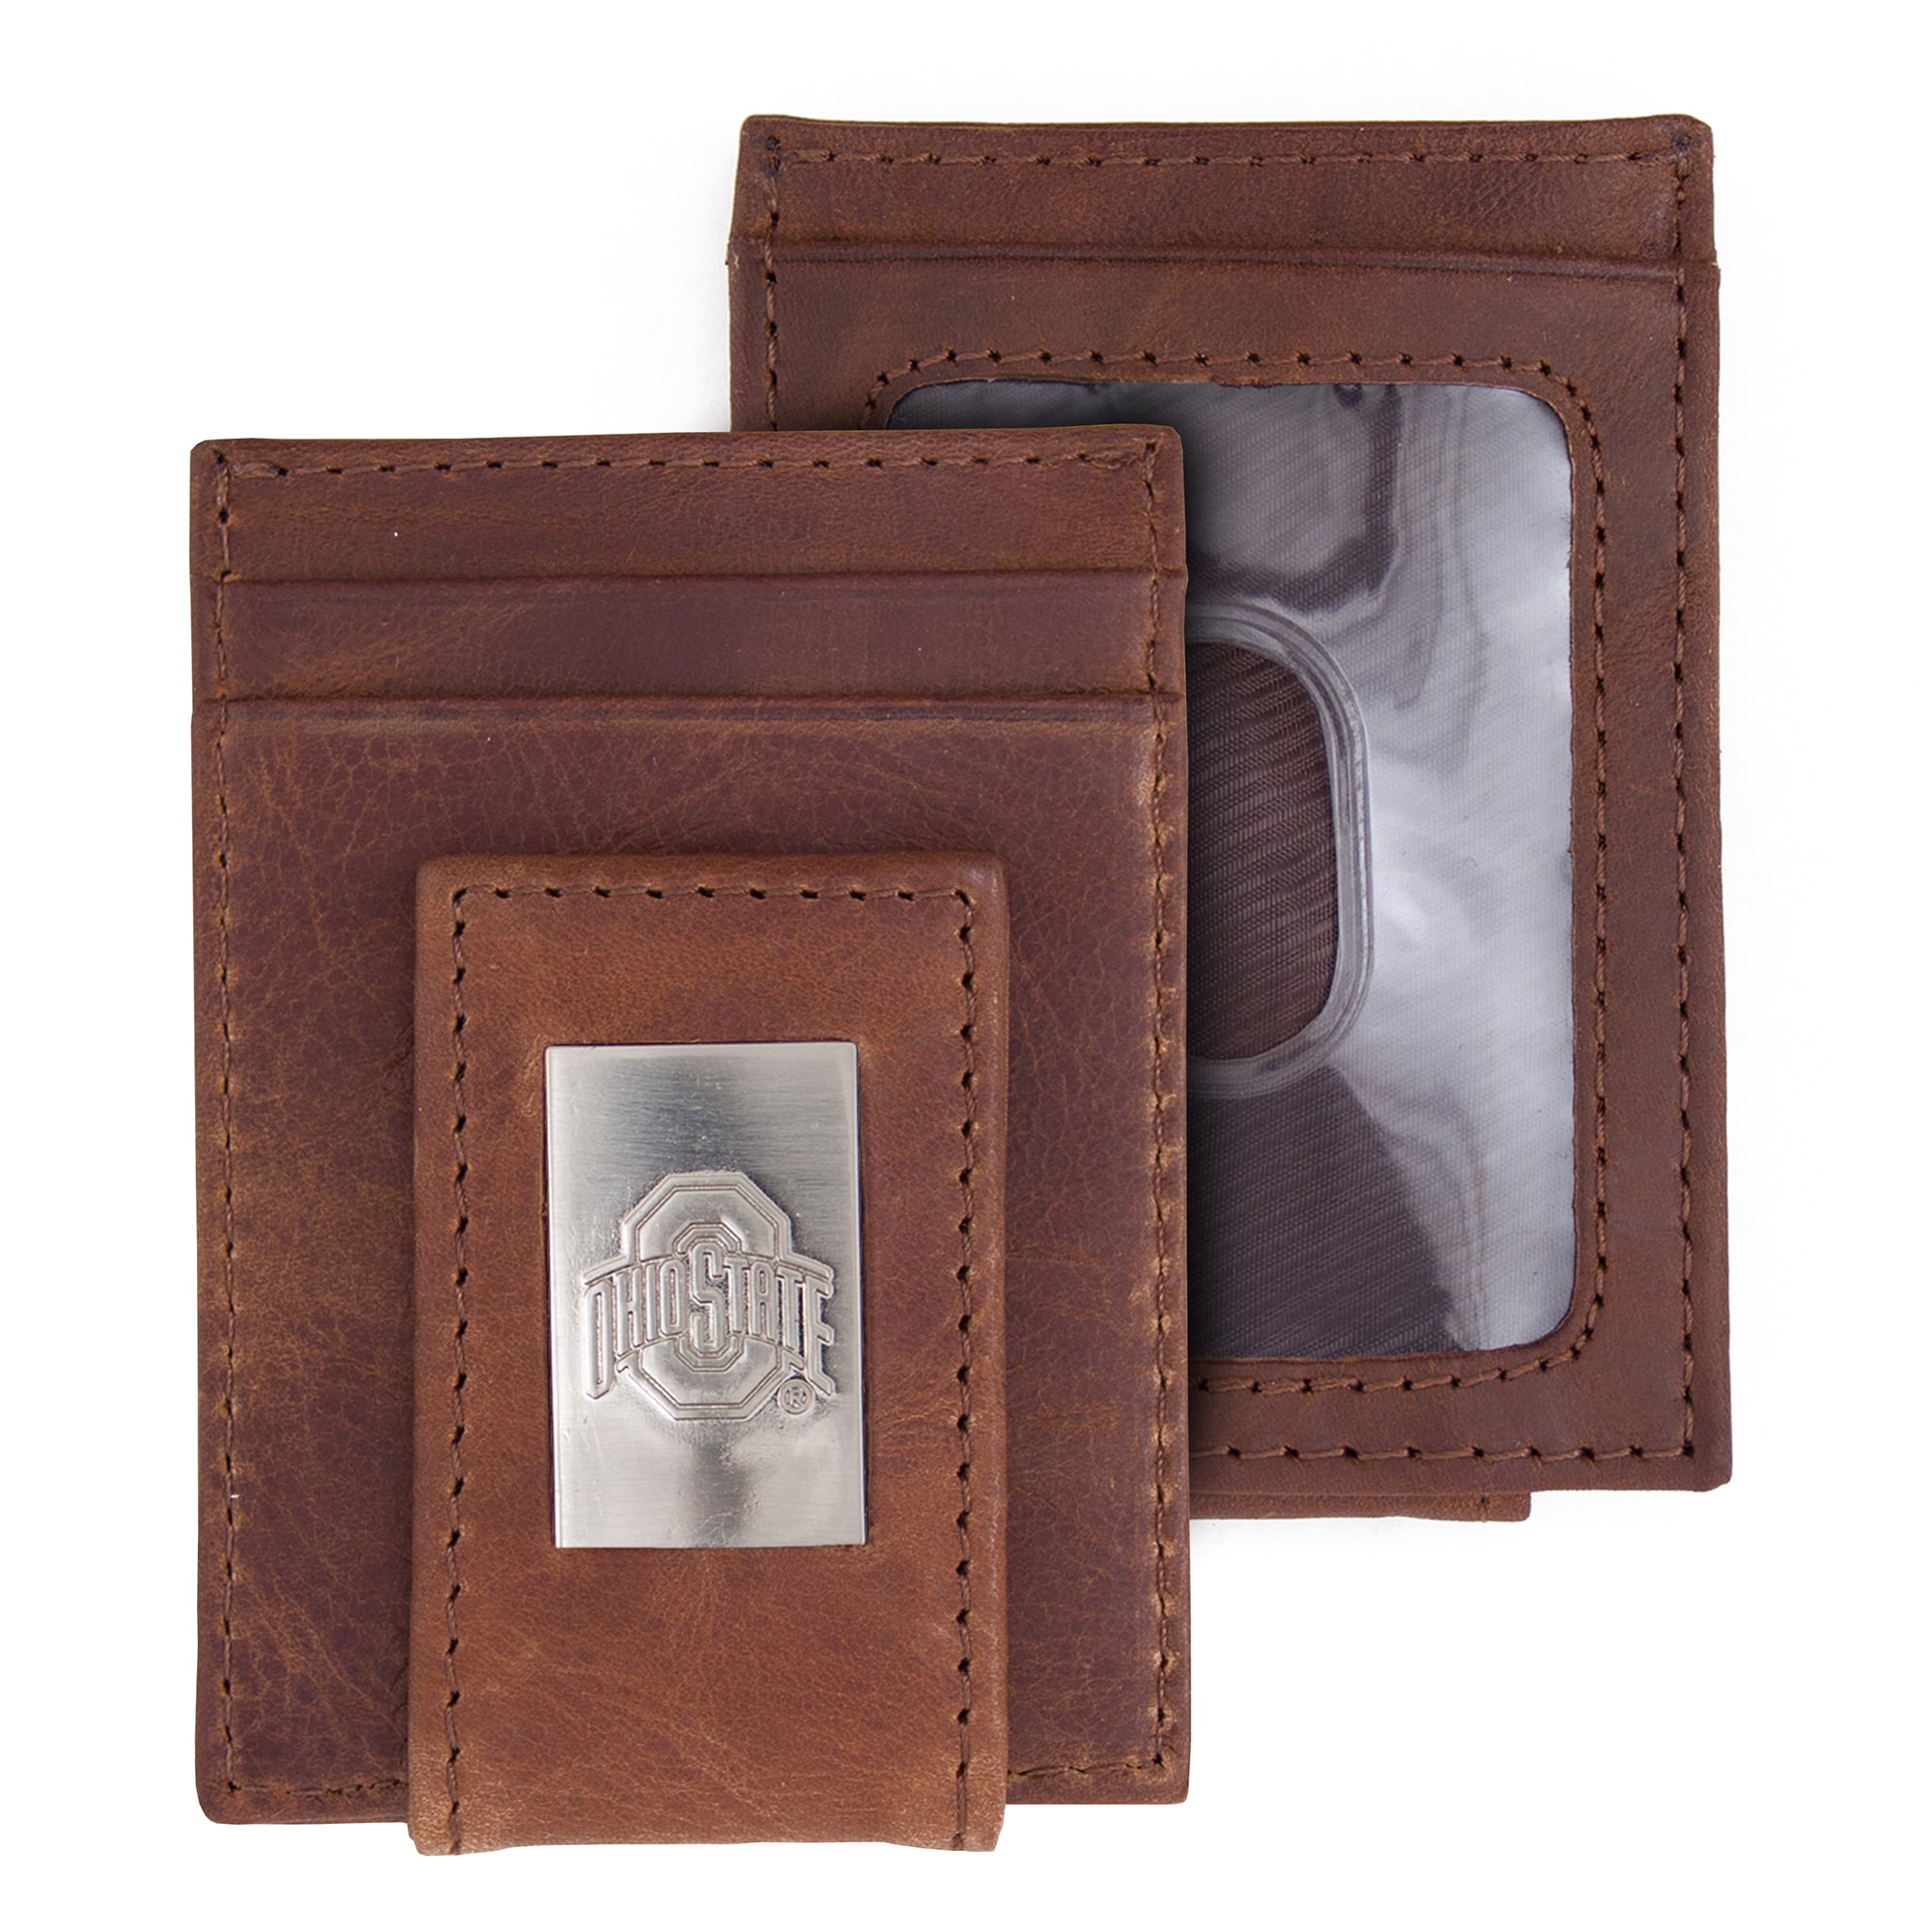 Brown Ohio State Buckeyes Leather Front Pocket Wallet - image 1 of 6